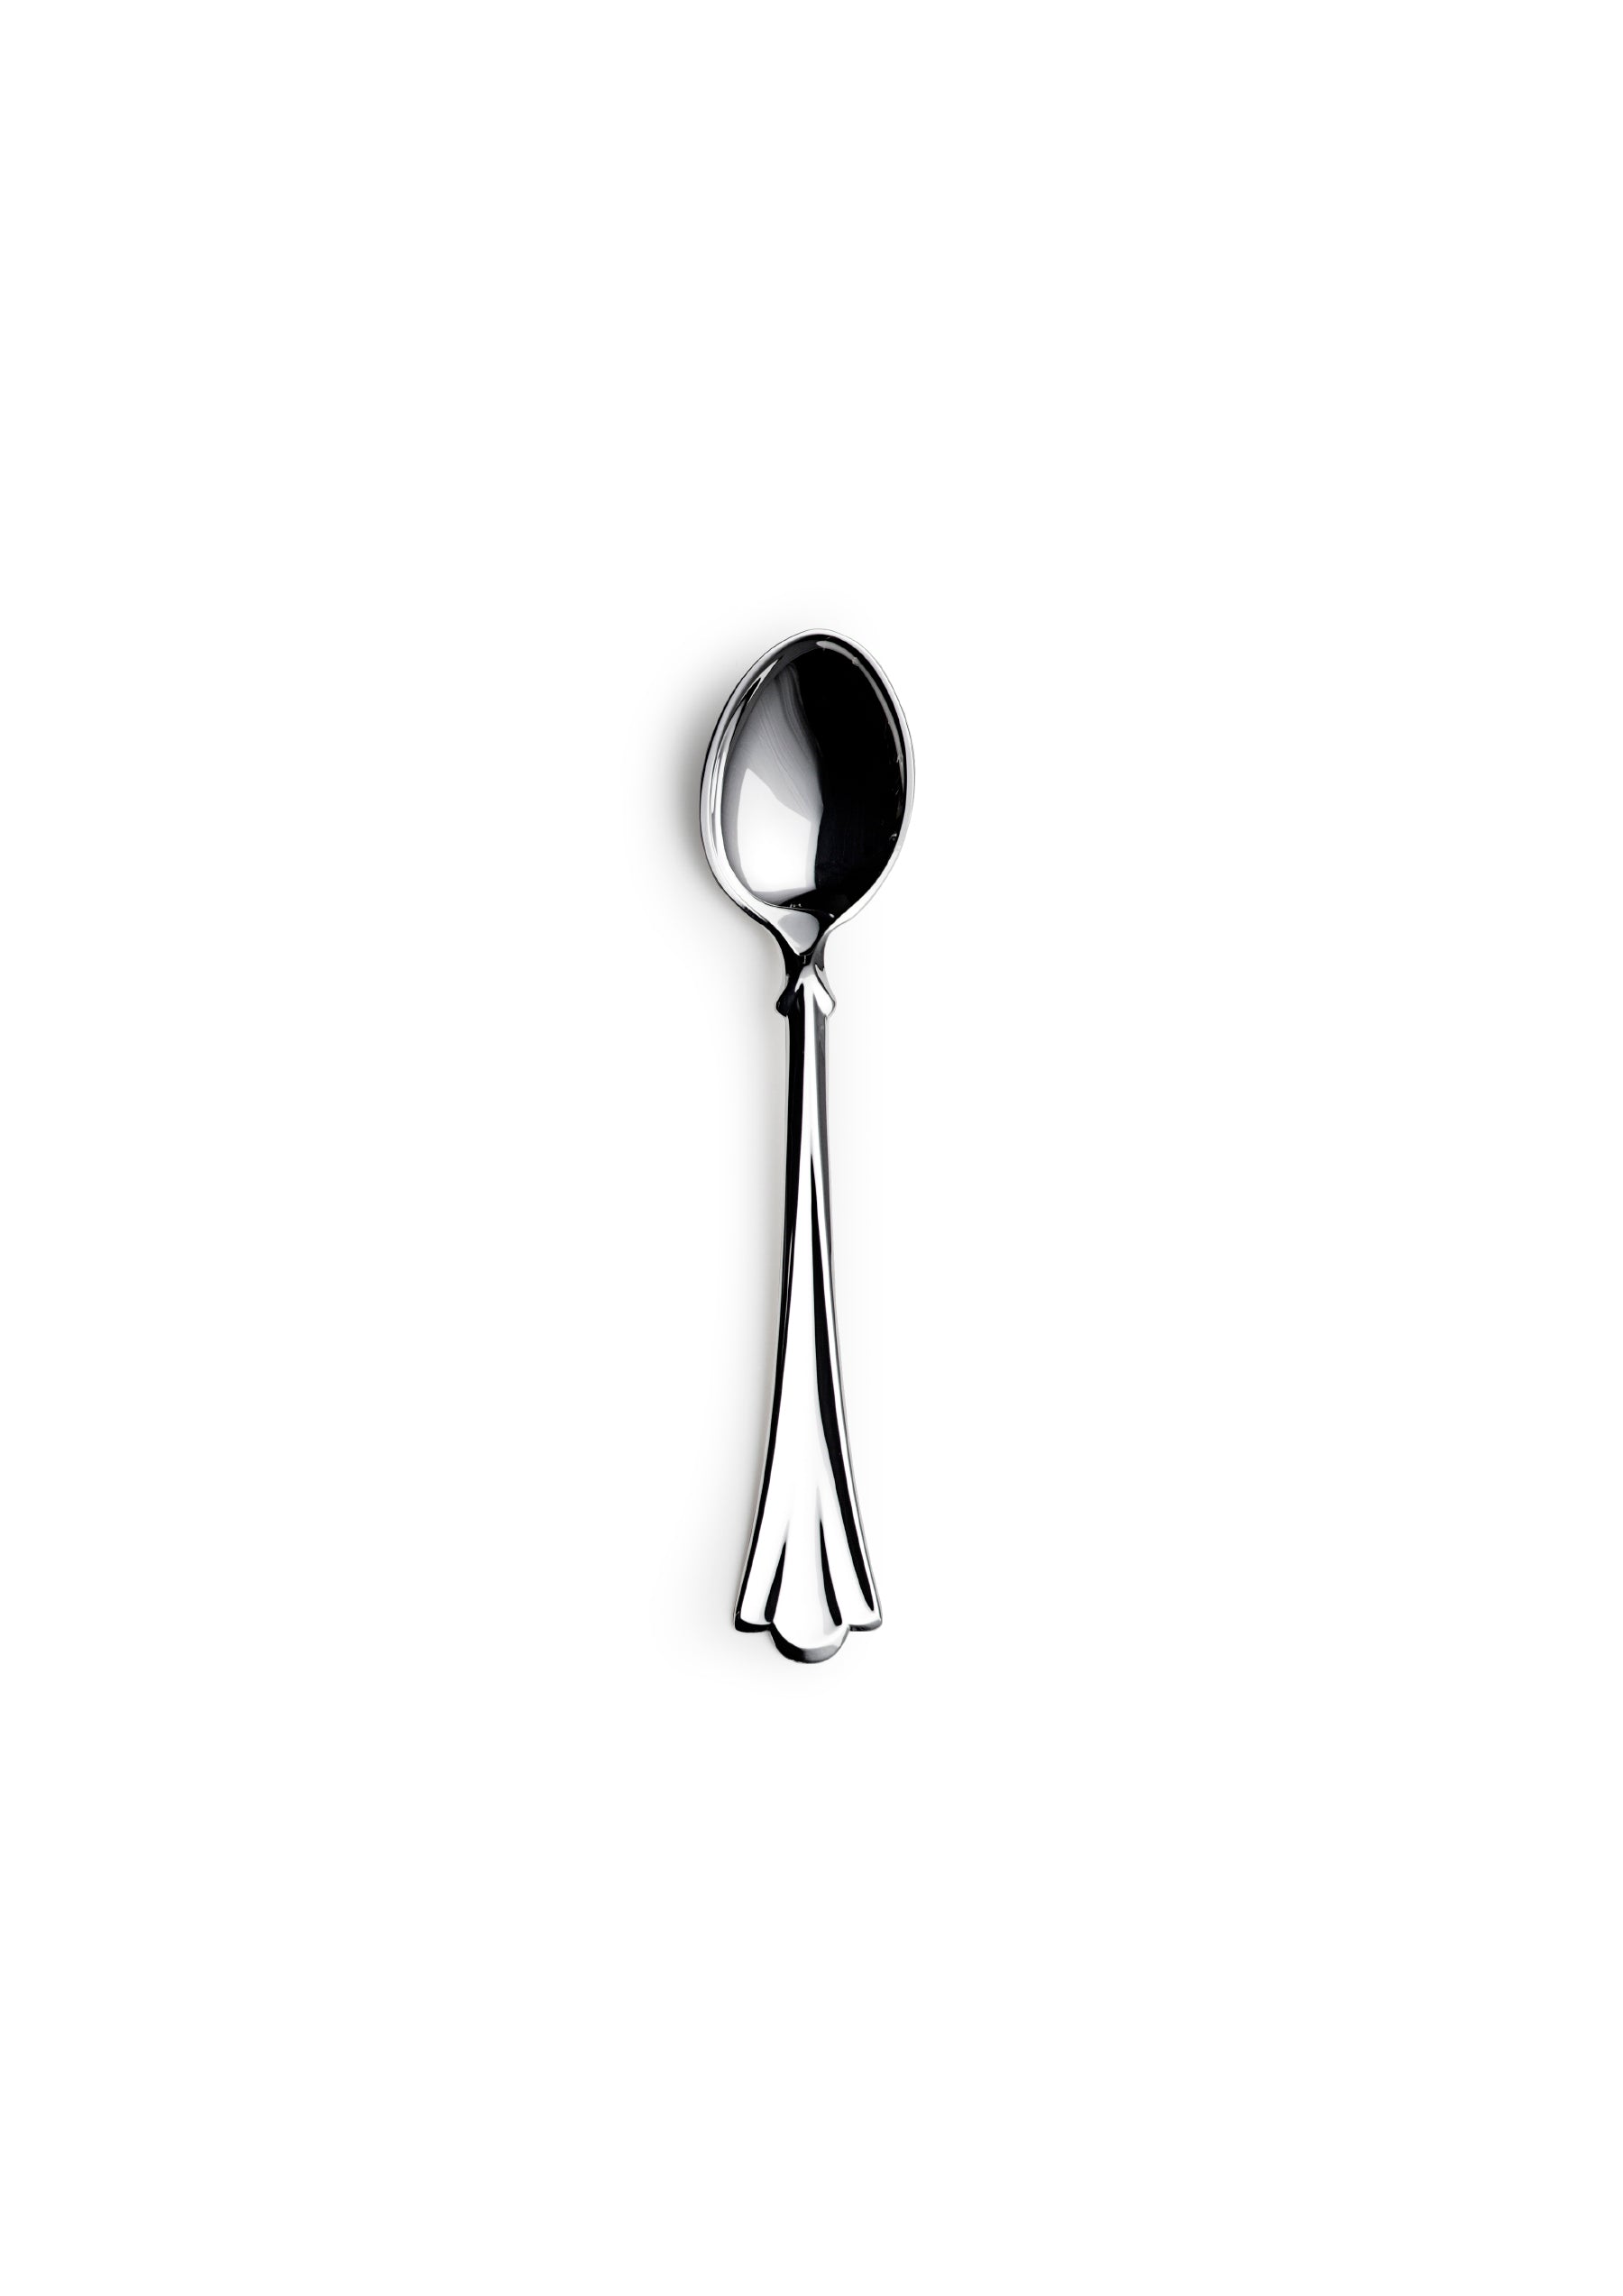 Lily coffee spoon 